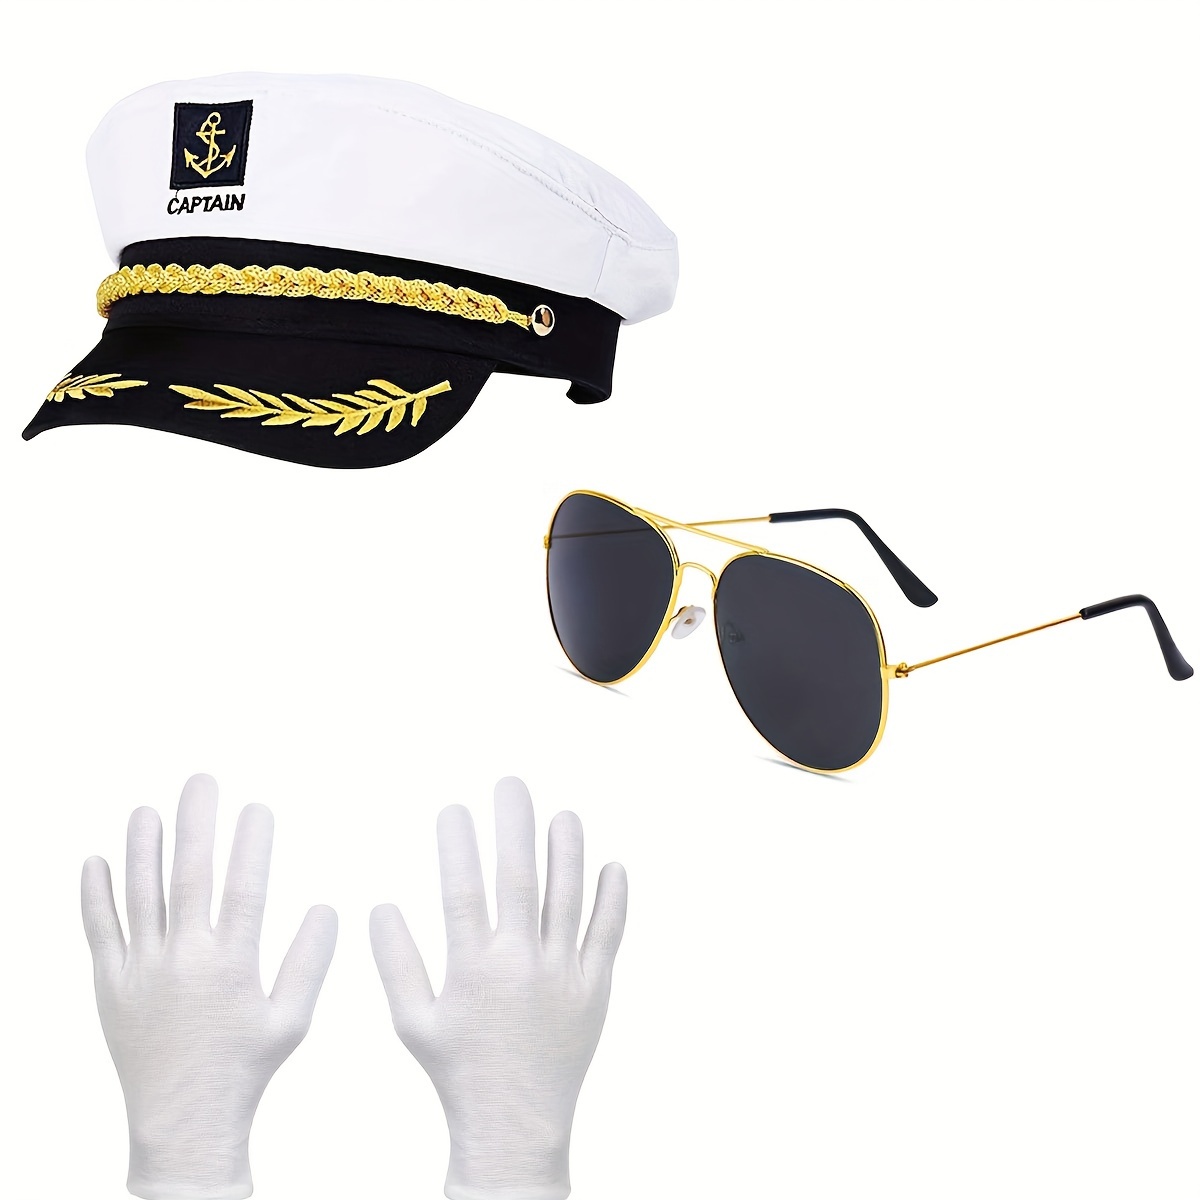 Funny Party Hats Yacht Captain Hat – Sailor Cap, Skipper Hat, Navy Marine  Hat - Adjustable - Costume Accessories (White)